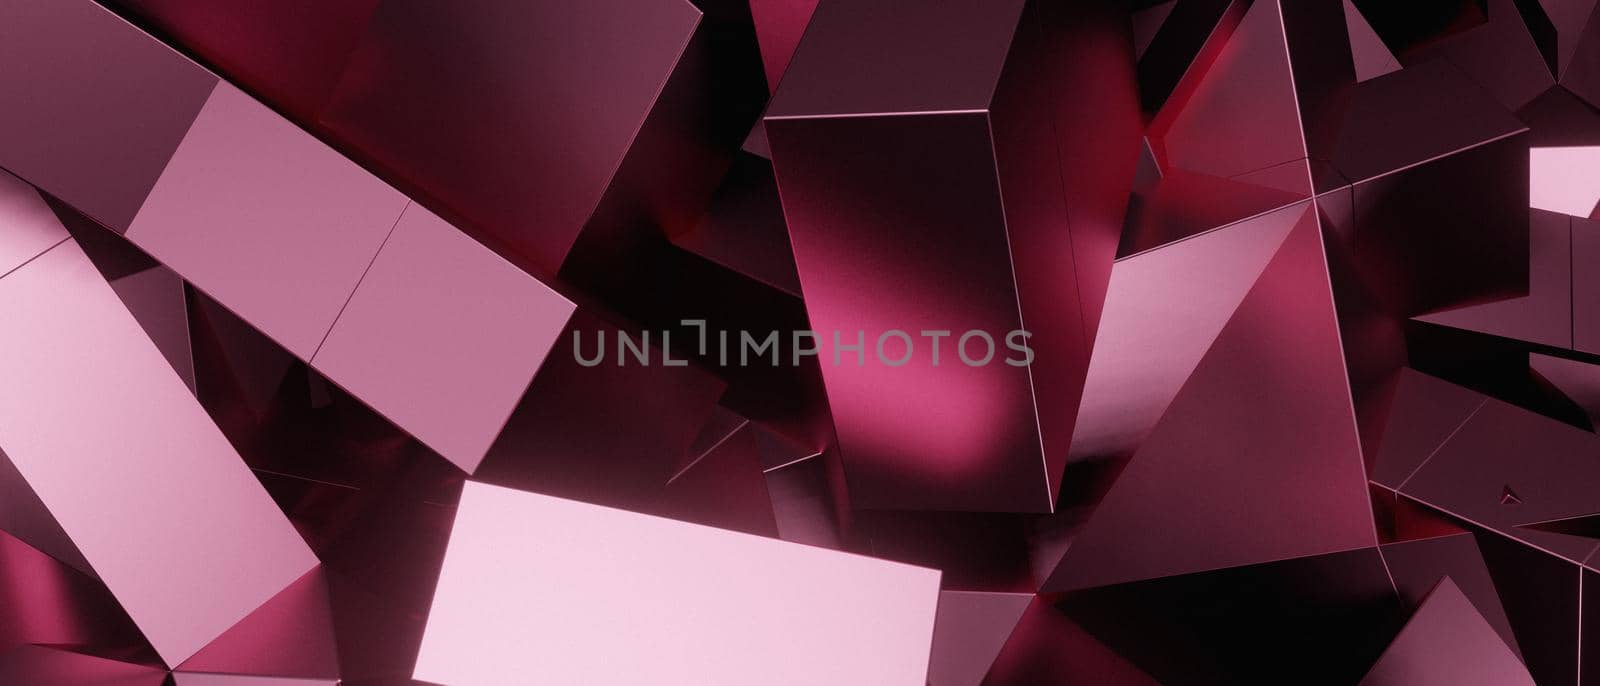 Abstract Luxurious 3D Geometric Chaos Trendy Futuristic Pastel Pink Iillustration Background Wallpaper 3D Illustration by yay_lmrb